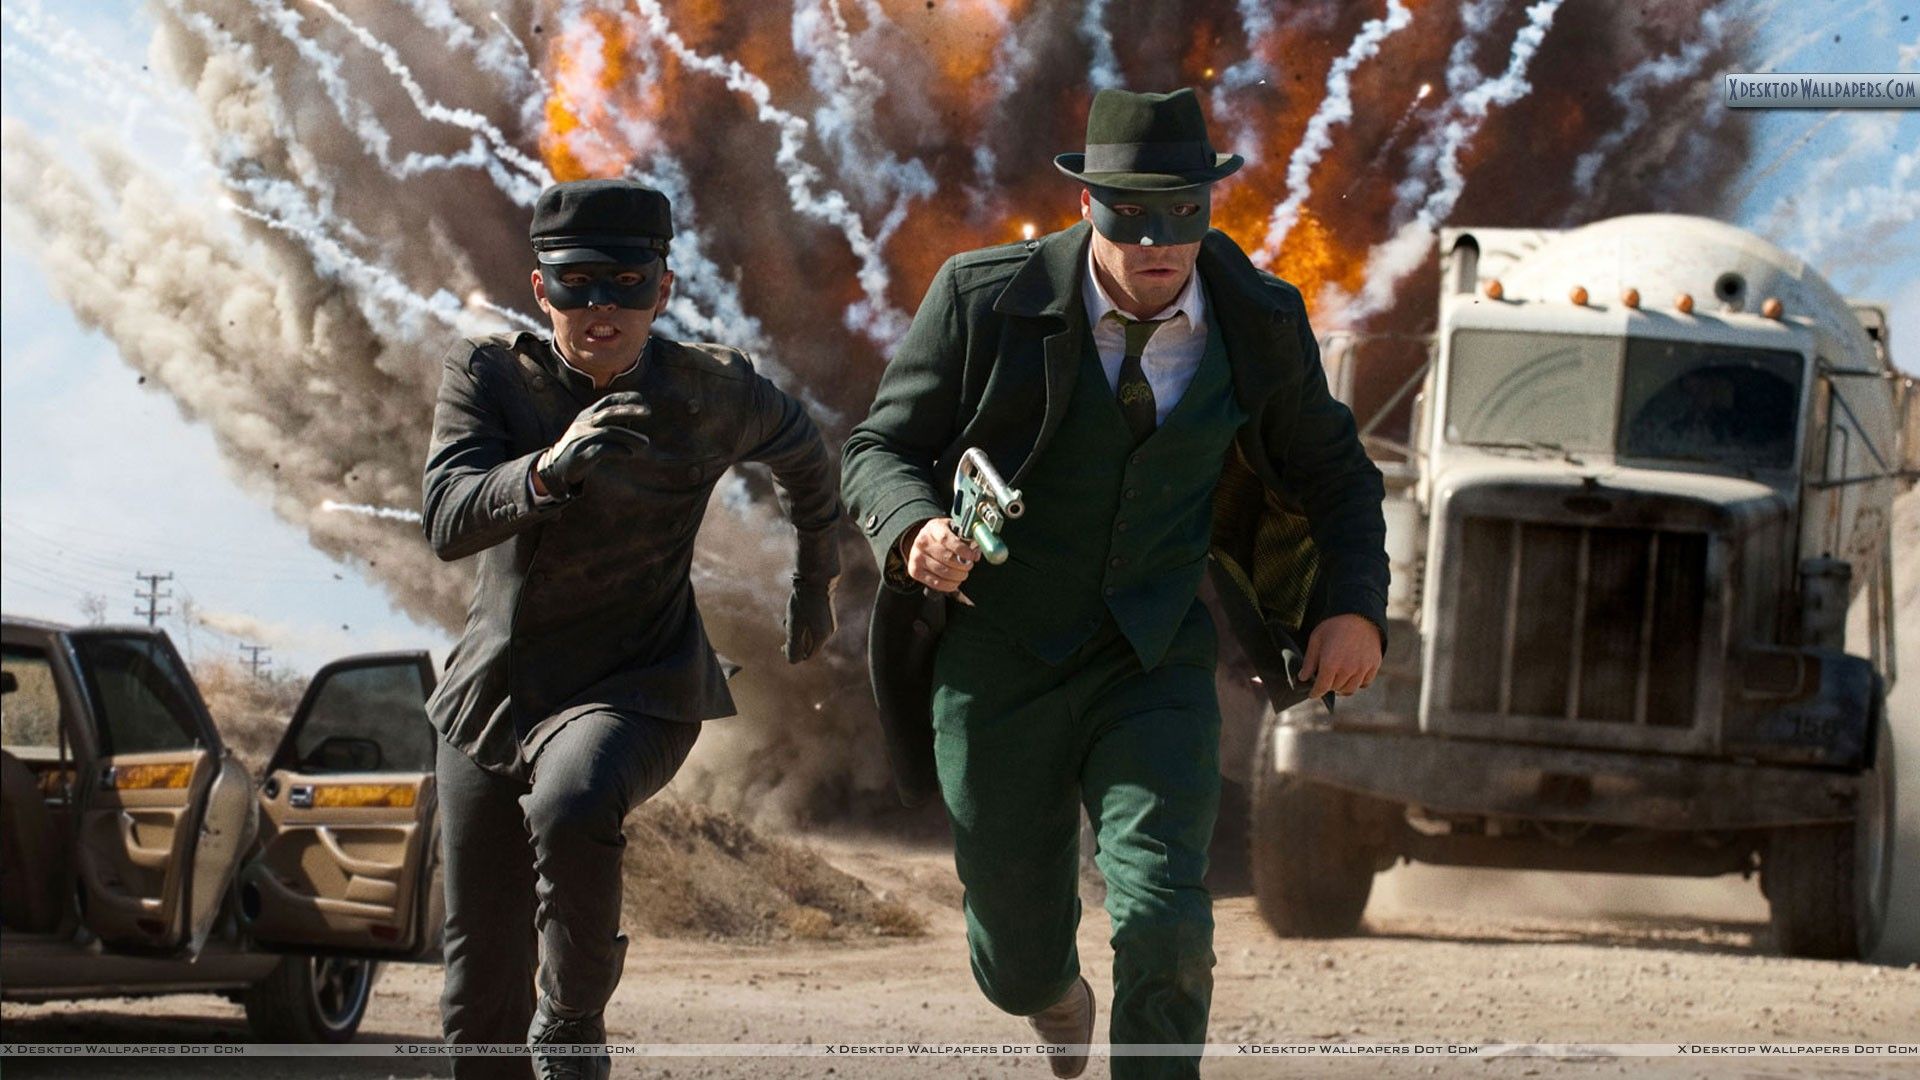 The Green Hornet Wallpaper, Photo & Image in HD